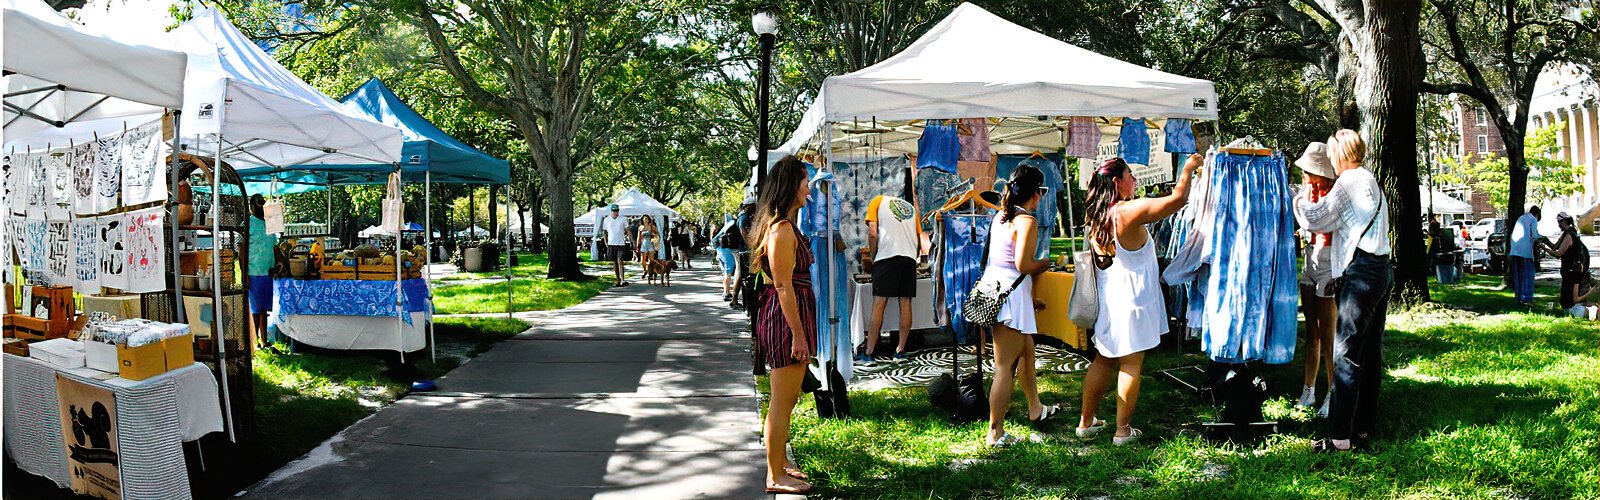 The Saturday Morning Market's summer location at Williams Park in downtown St. Petersburg provides ample shade to make it comfortable for market goers to browse at leisure. 